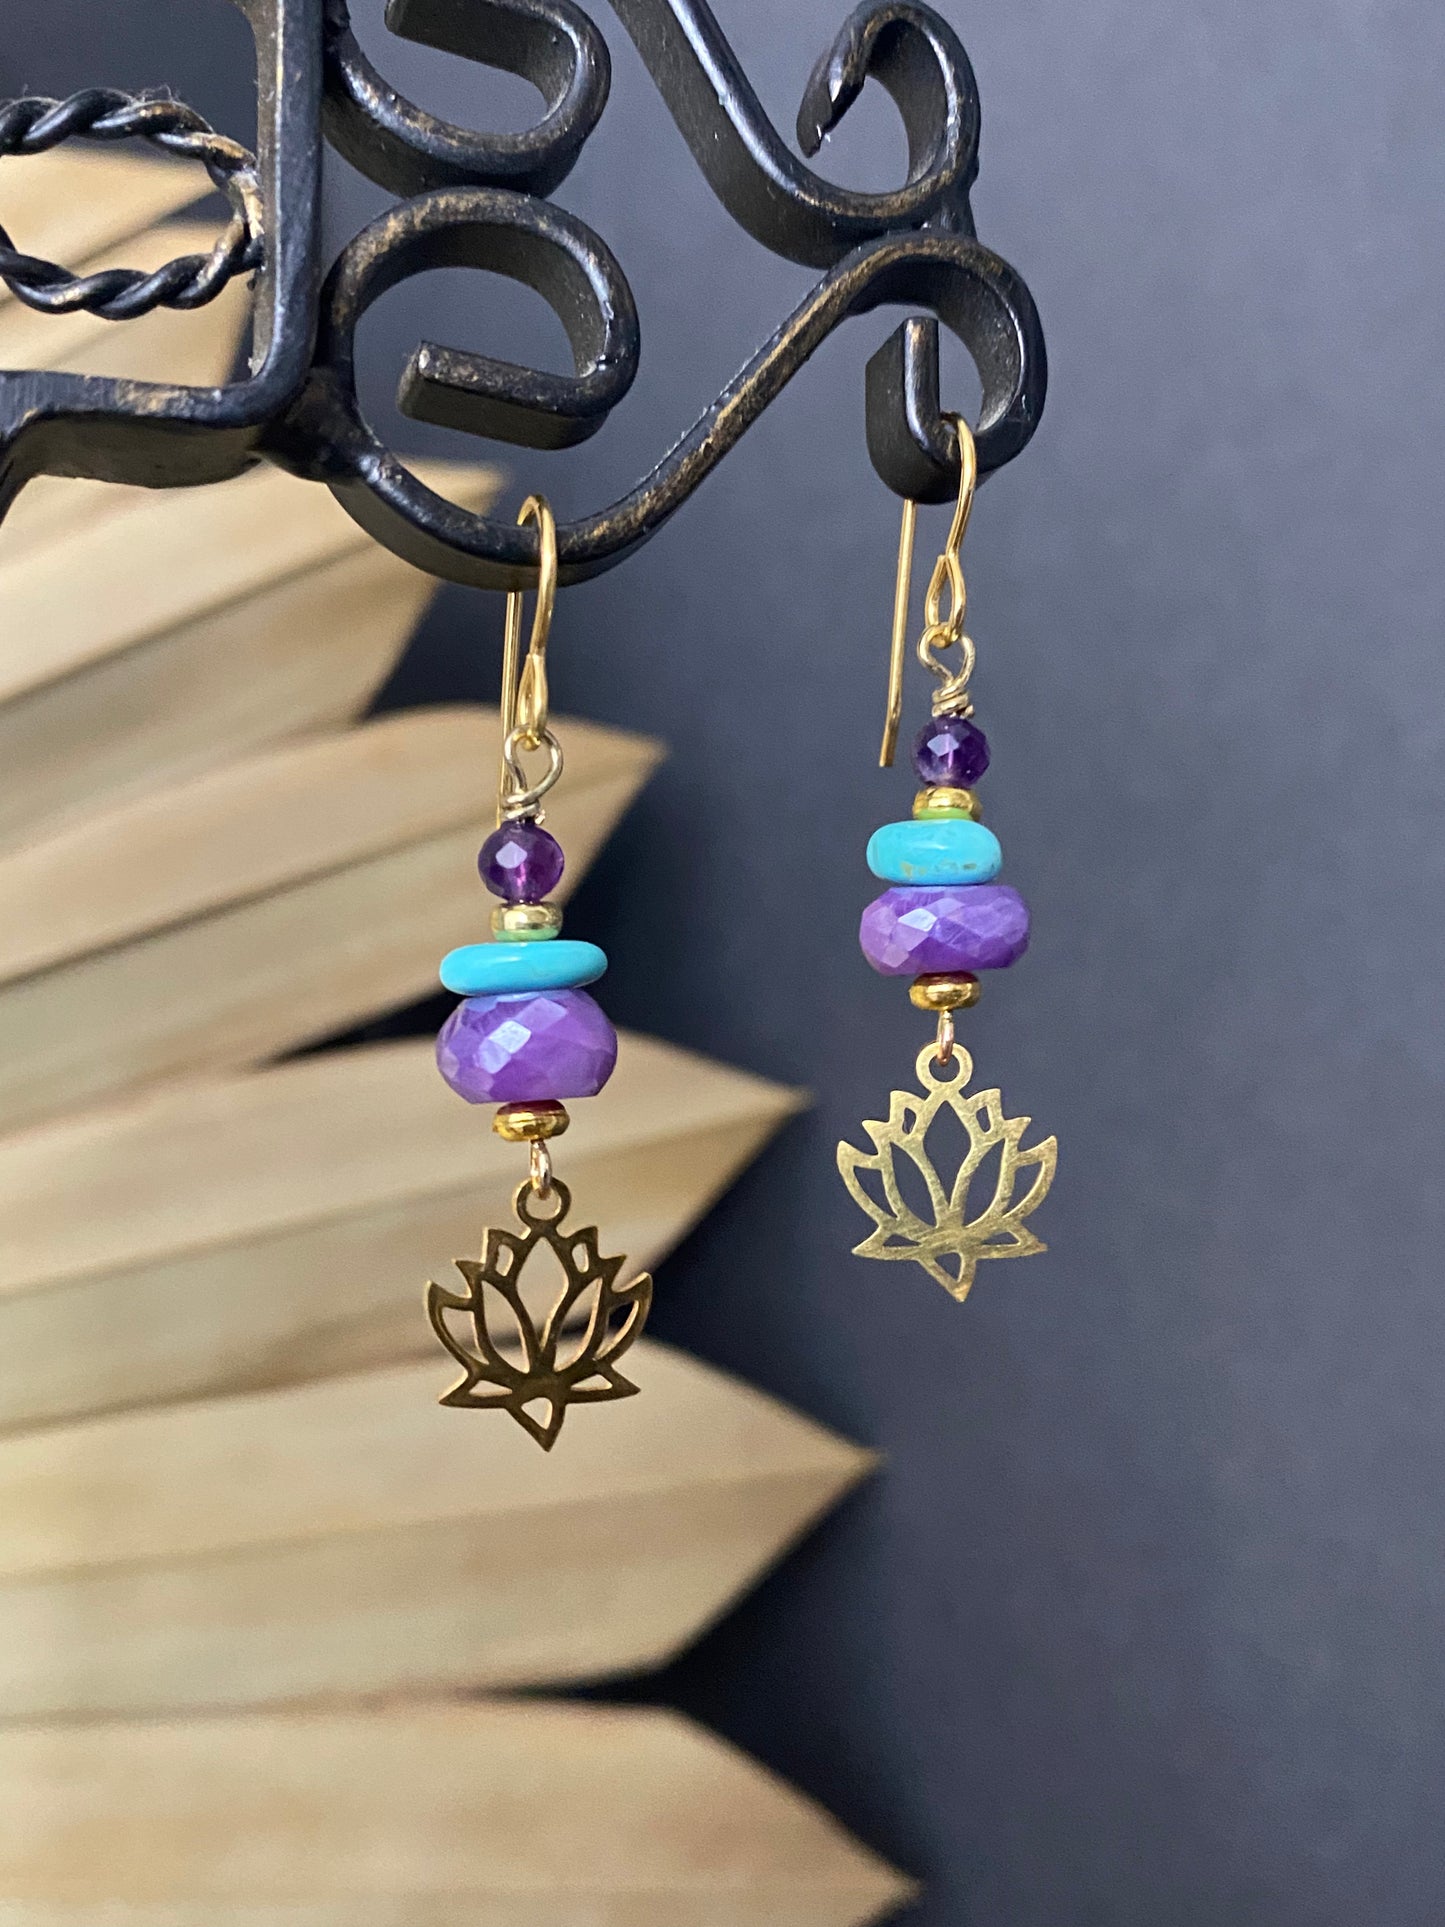 Turquoise, amethyst, lotus flower charms and gold metal earrings.